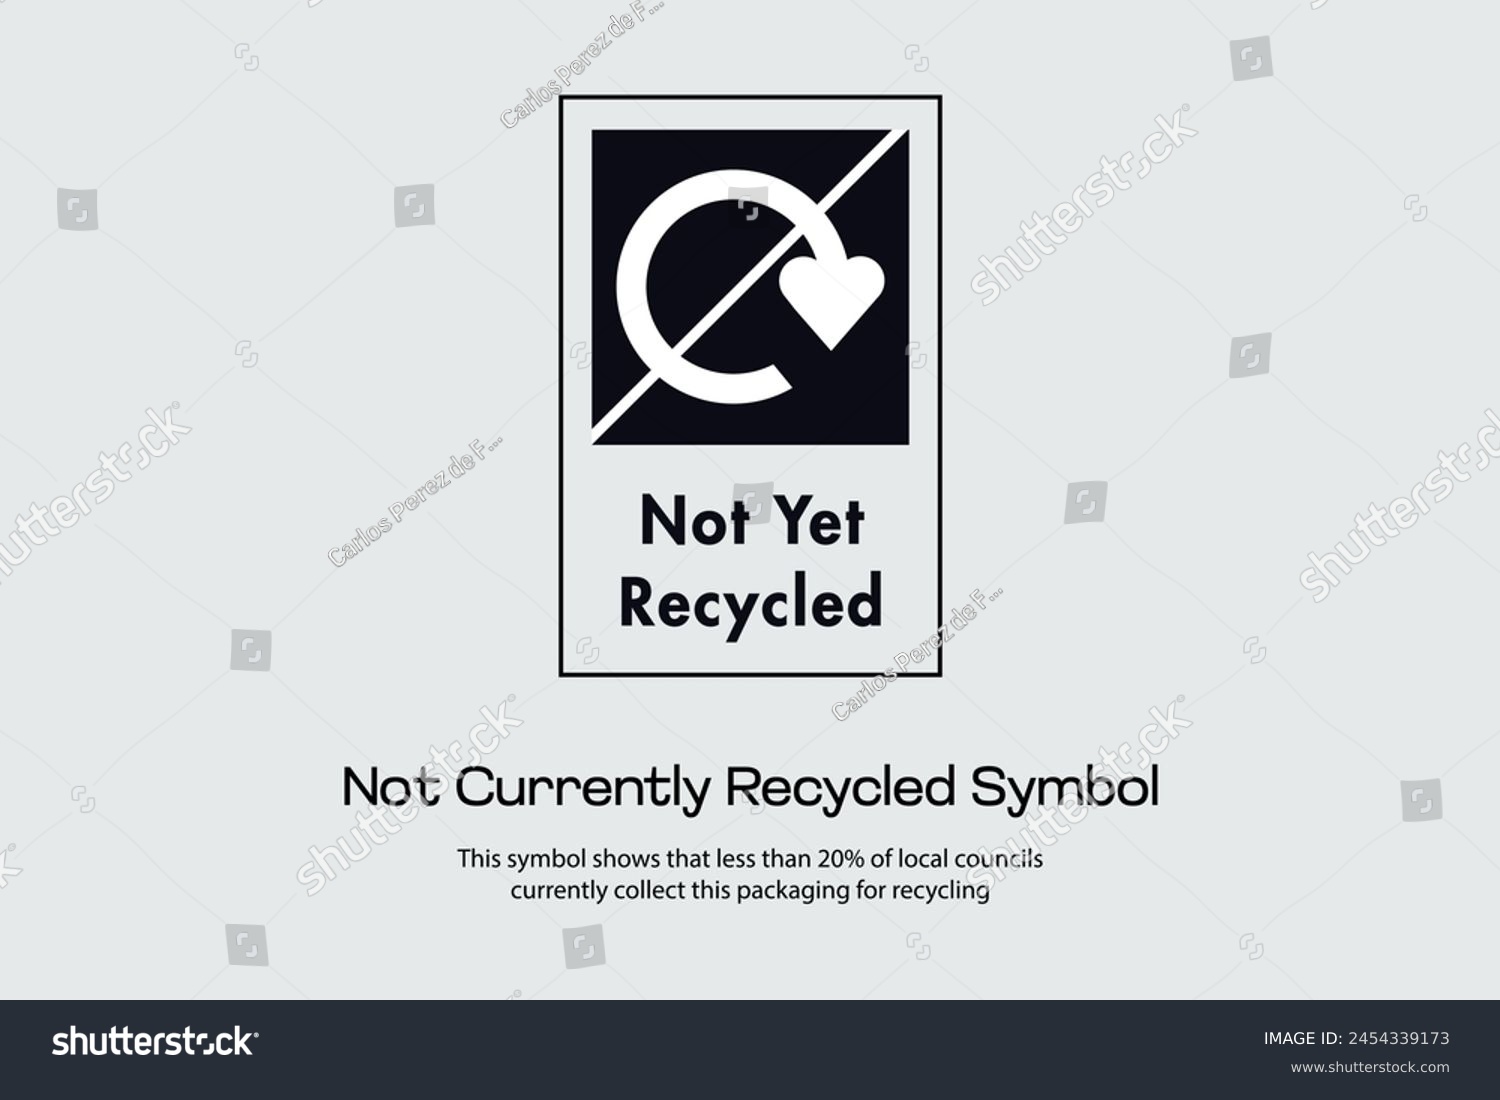 SVG of This symbol shows that less than 20% of local councils currently collect this packaging for recycling svg